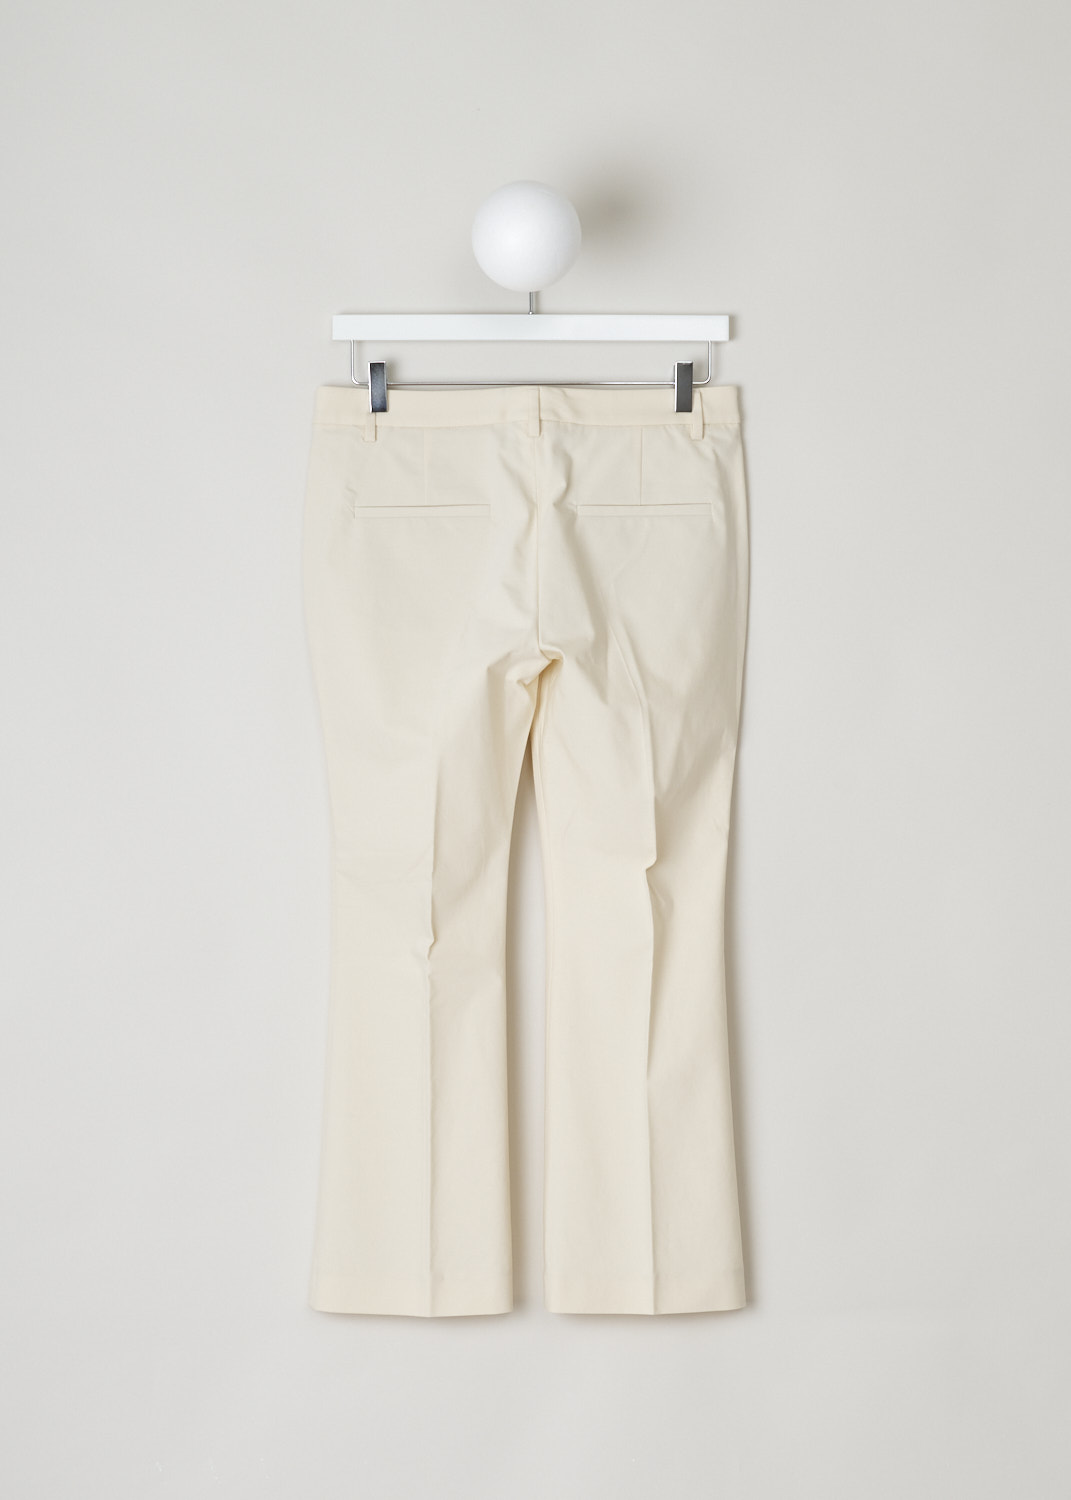 Brunello Cucinelli, Cream coloured boot-cut chino, M0F70P1951_C7070, beige, back, Made in the flat front model, with boot-cut legs. Furthermore, this model has two forward slanted pockets on the front and two jetted pockets on the back.